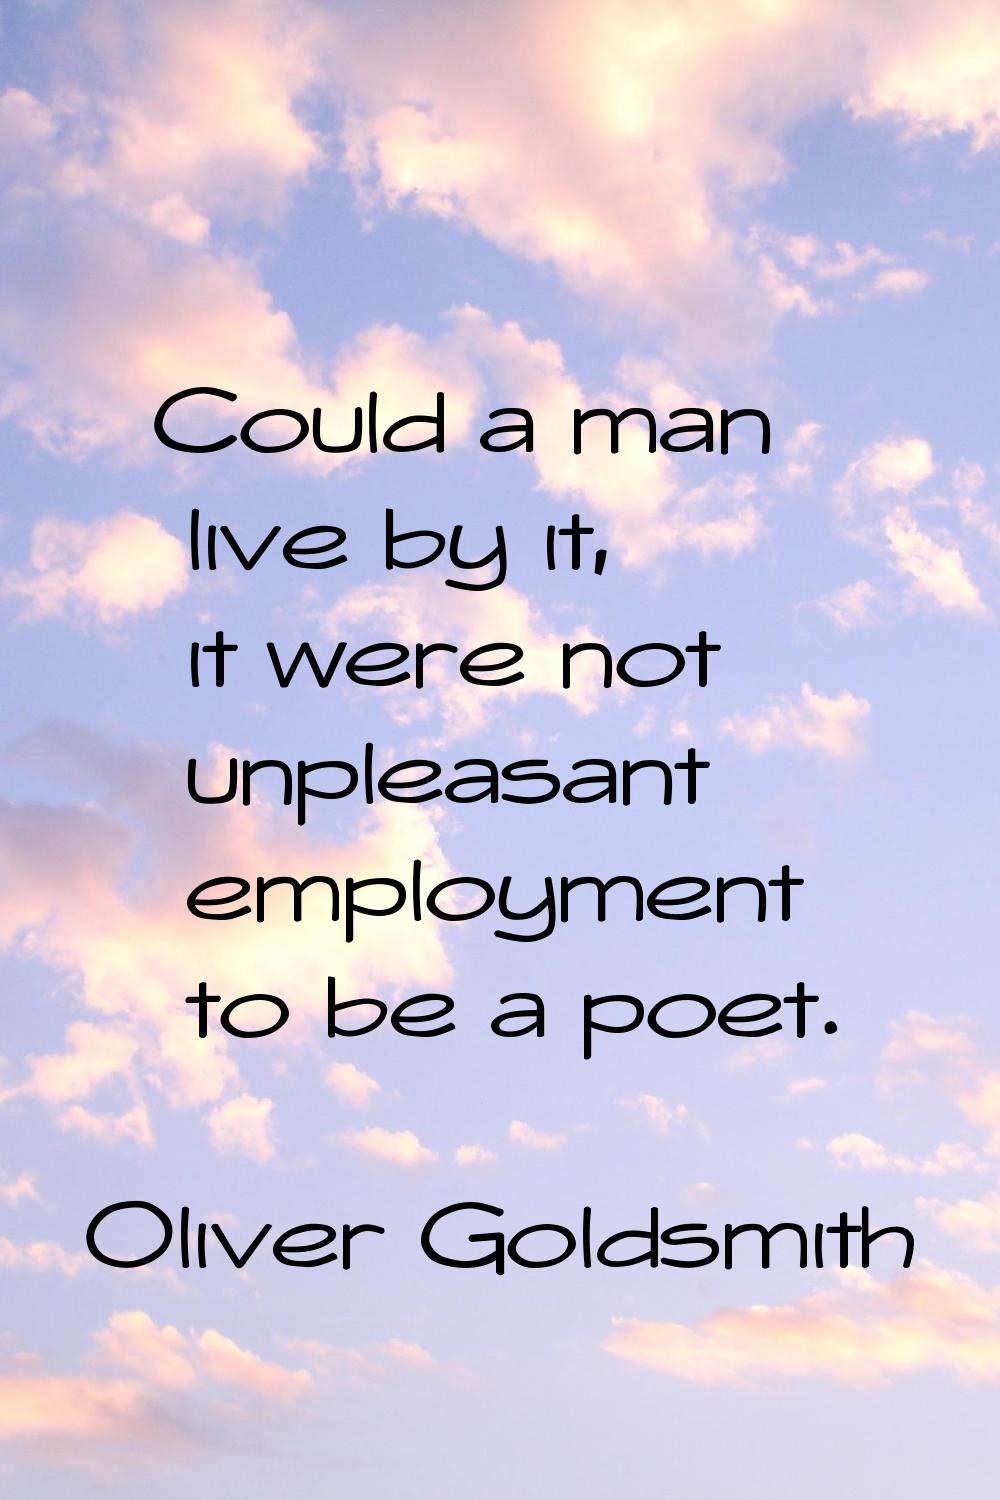 Could a man live by it, it were not unpleasant employment to be a poet.